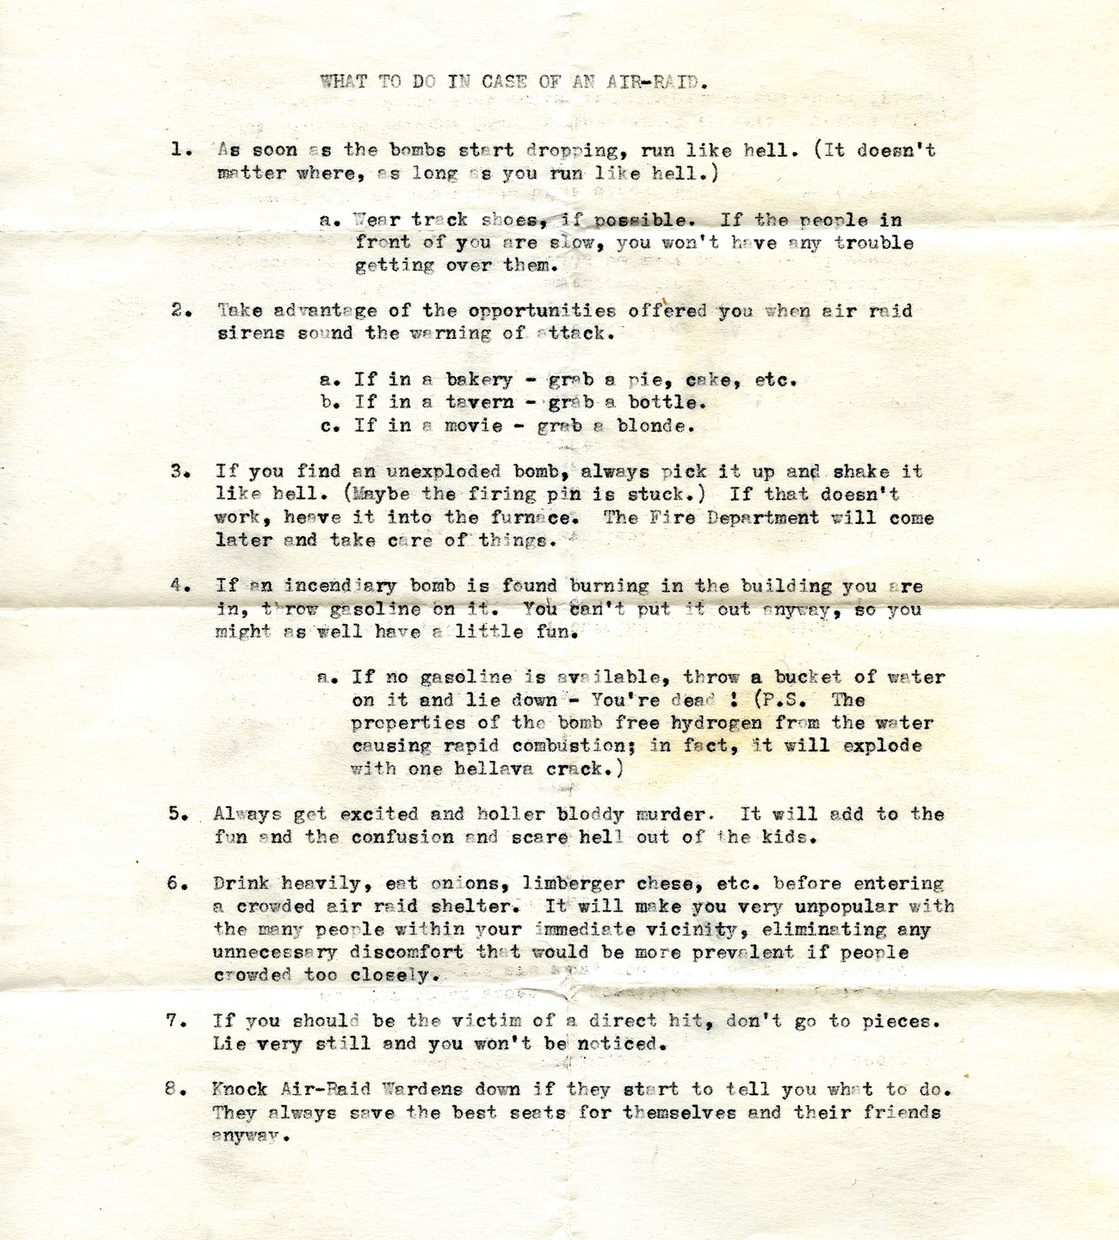 A slightly yellowed and stained document with many creases and crease marks has the headline “WHAT TO DO IN CASE OF AN AIR-RAID” in typewritten font. The text on the page is slightly illegible.